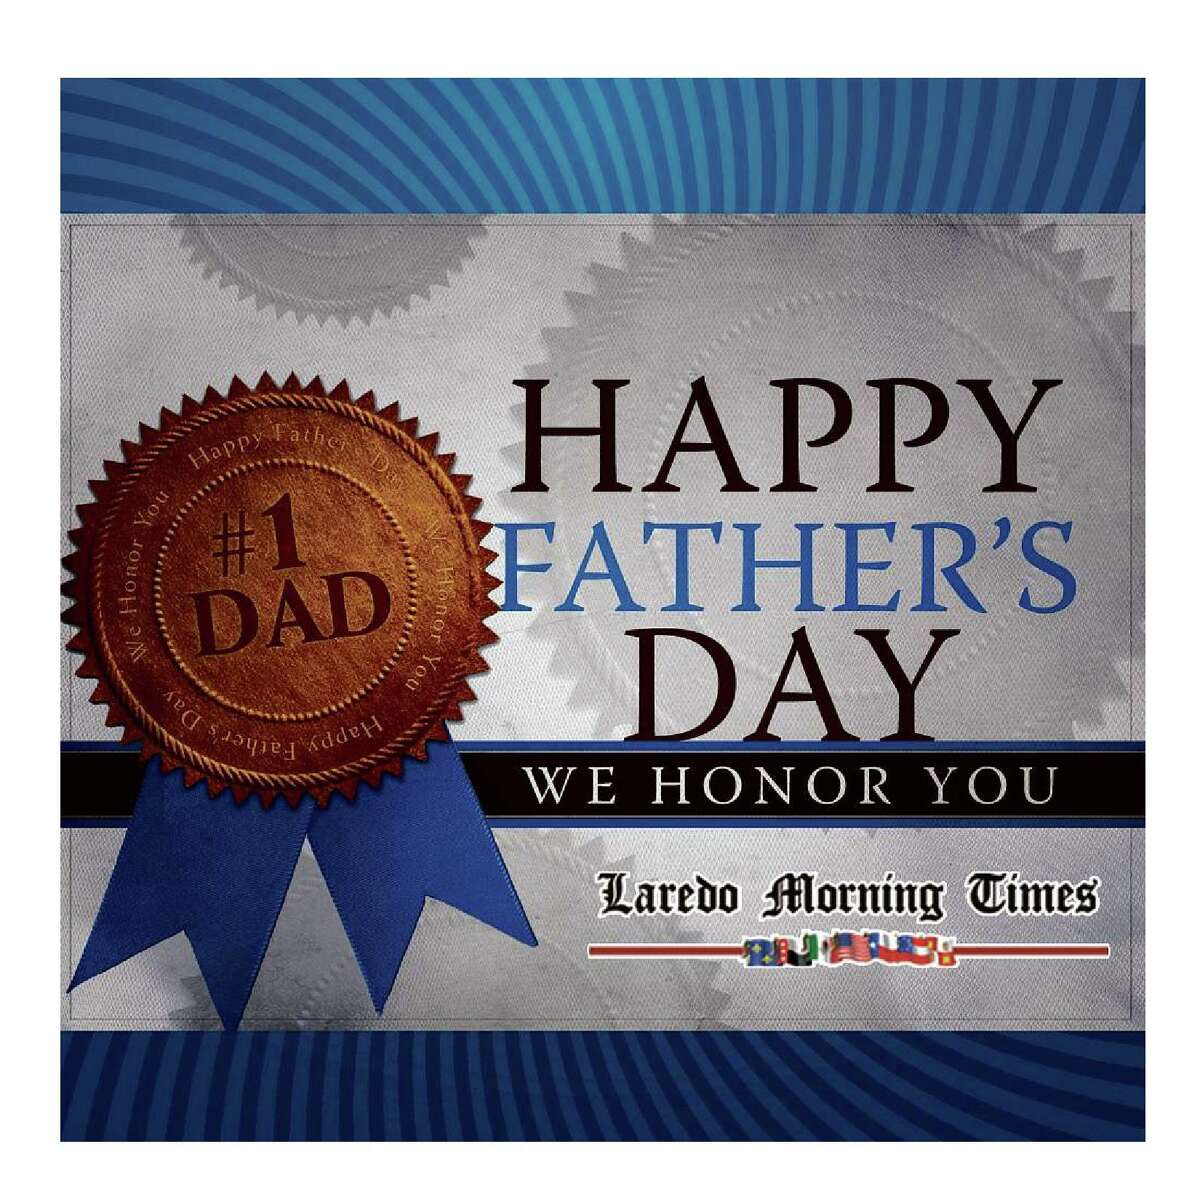 LMT readers celebrated their dads on Fathers' Day.